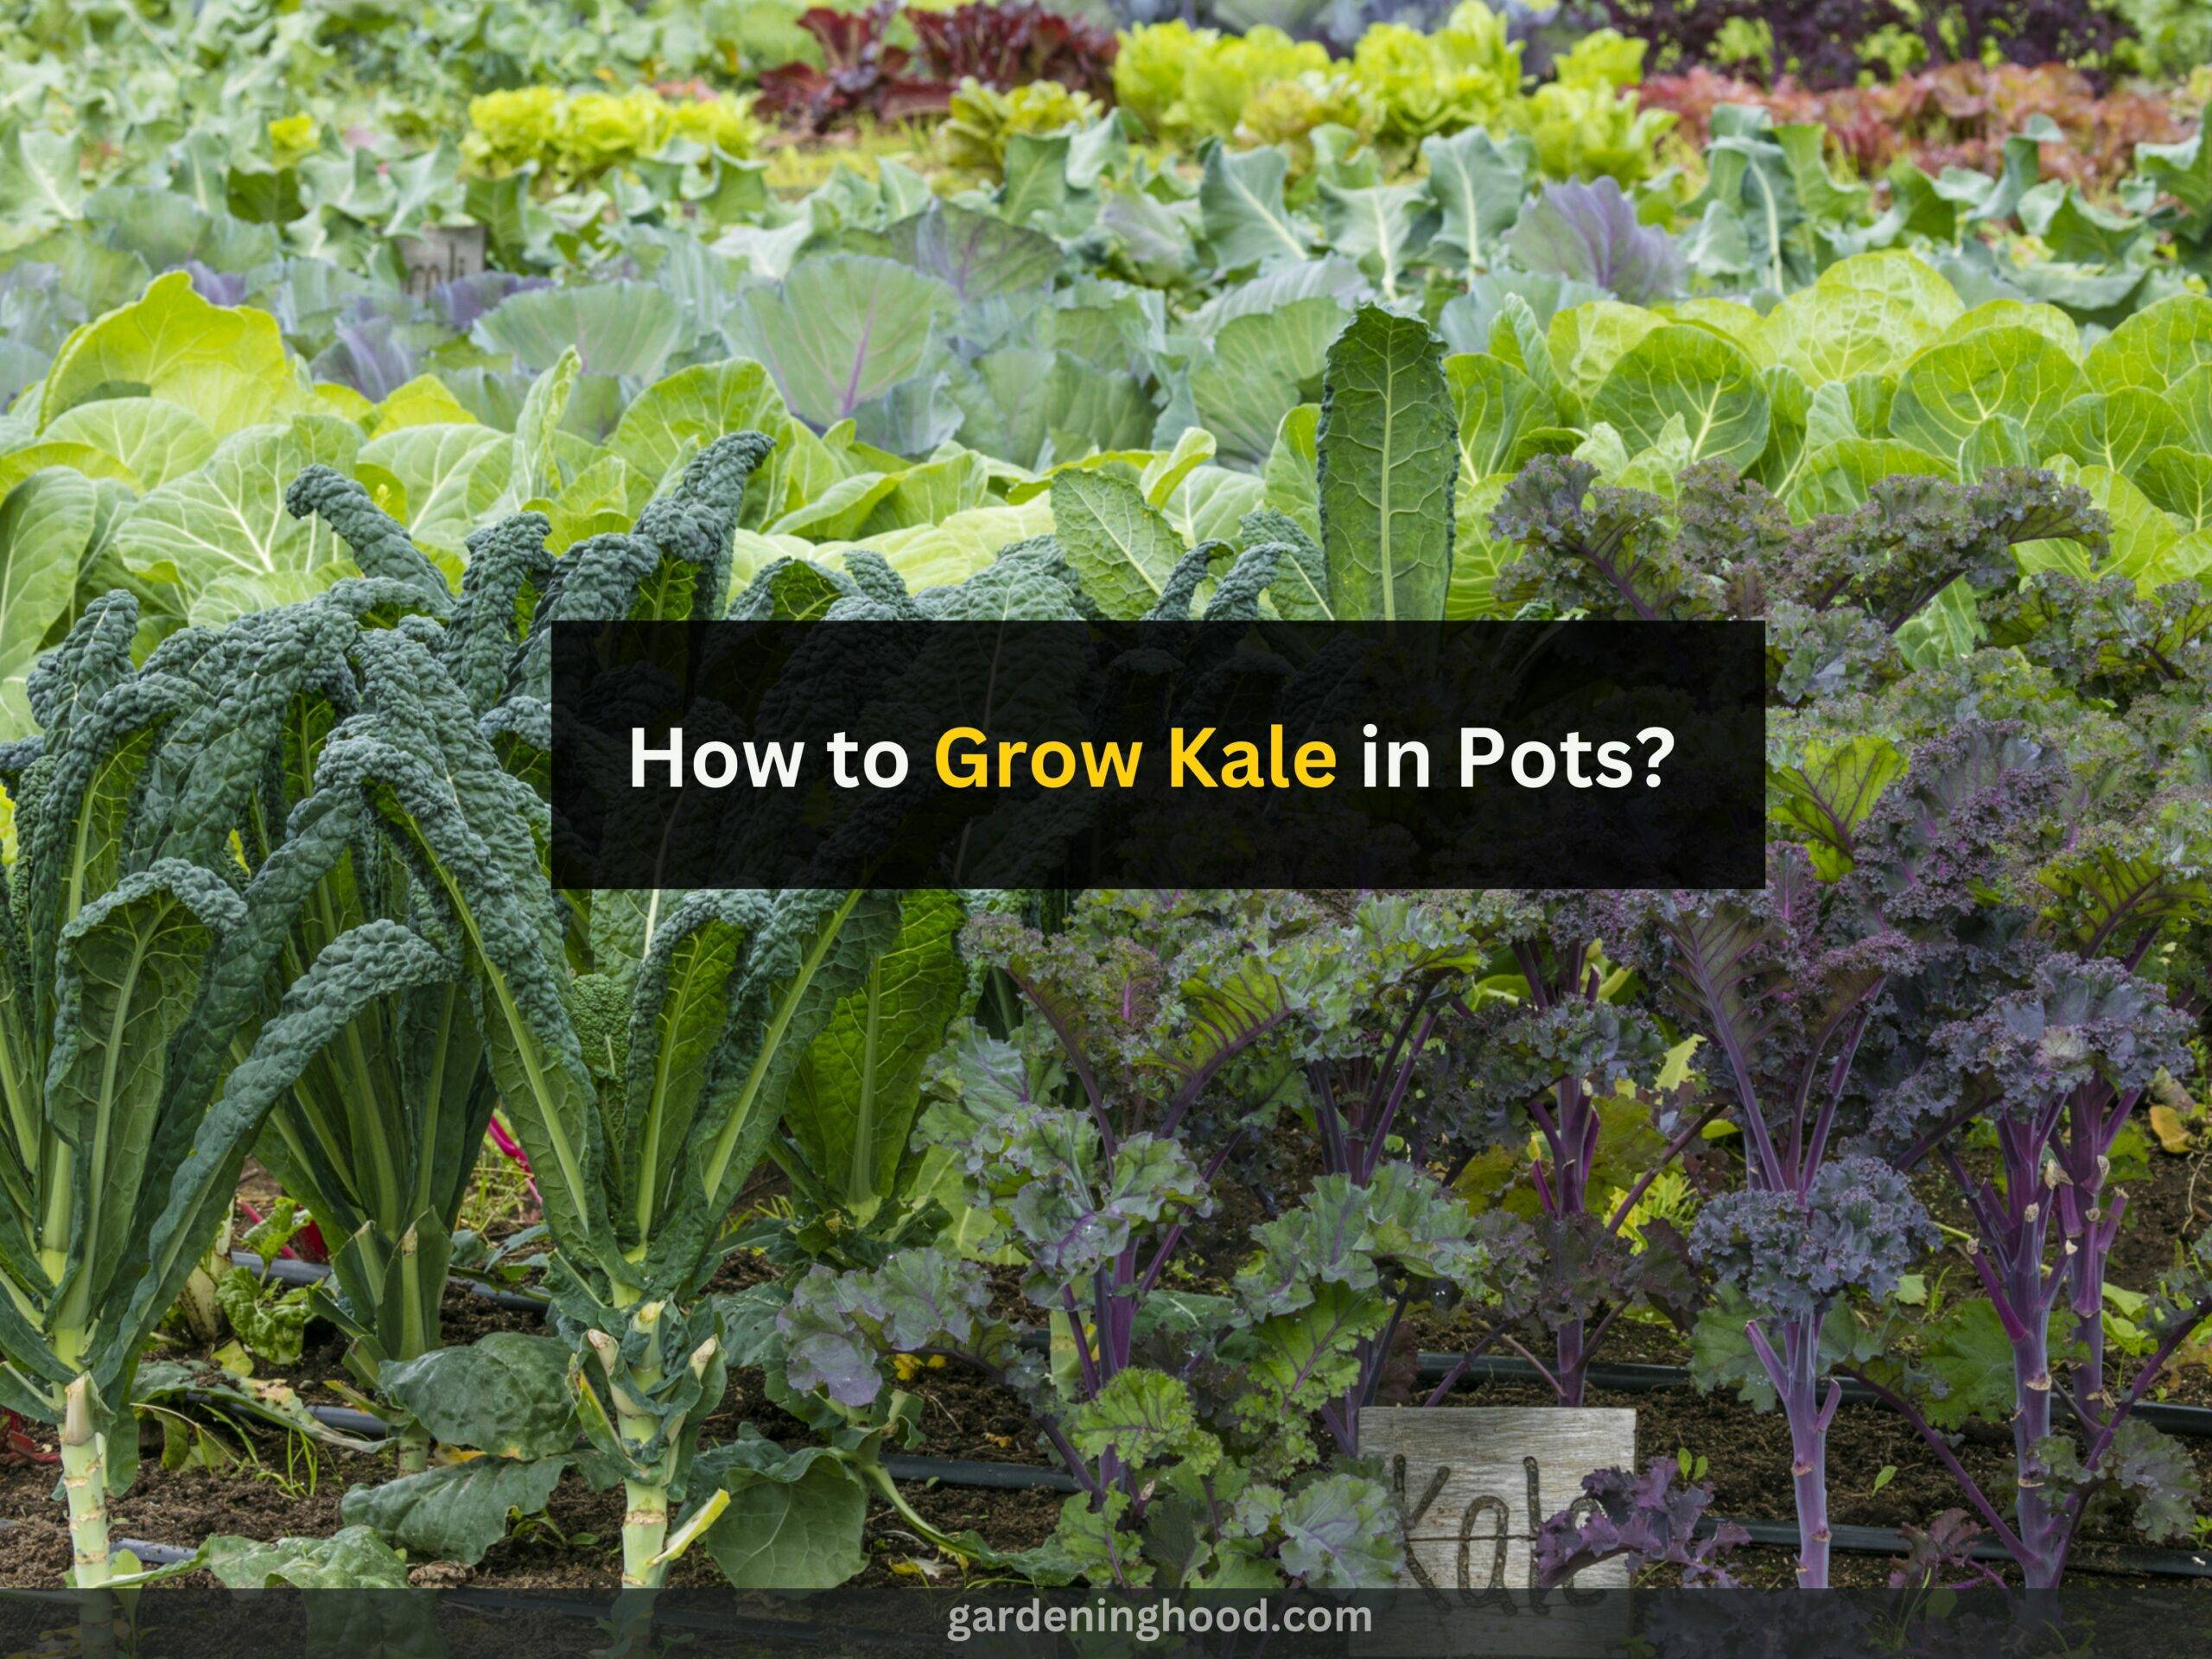 How to Grow Kale in Pots? (Step-by-Step Guide)